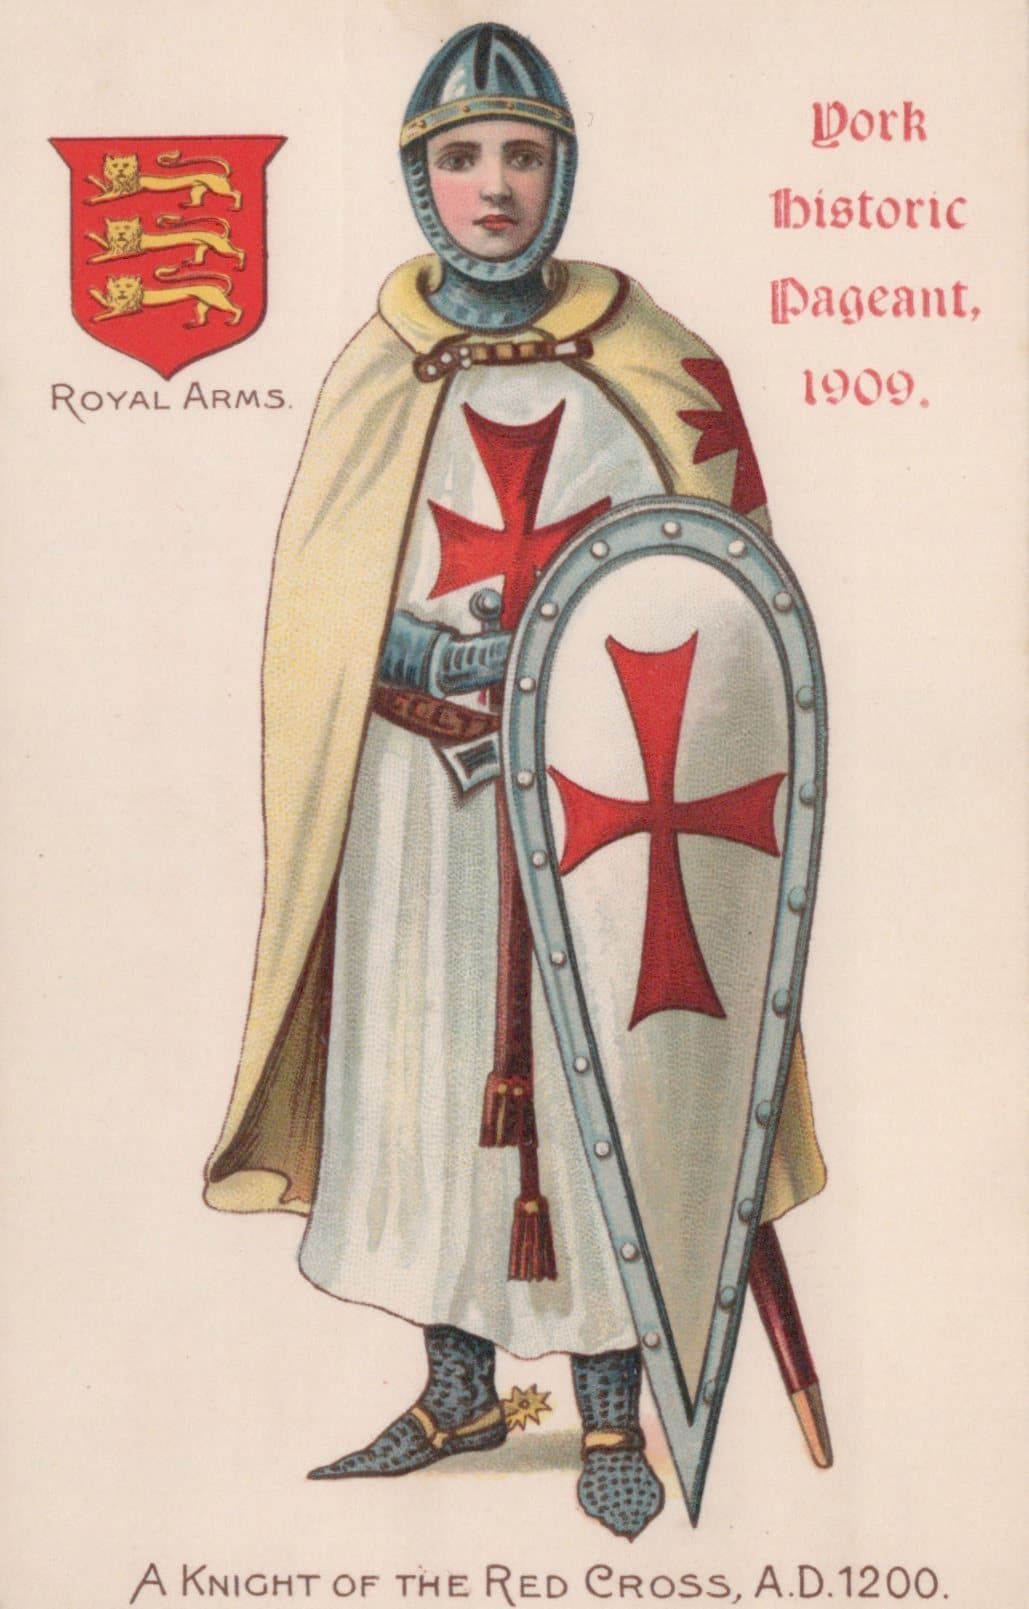 Pageants Postcard - York Historic Pageant 1909 - A Knight of The Red Cross, A.D.1200 - Mo’s Postcards 